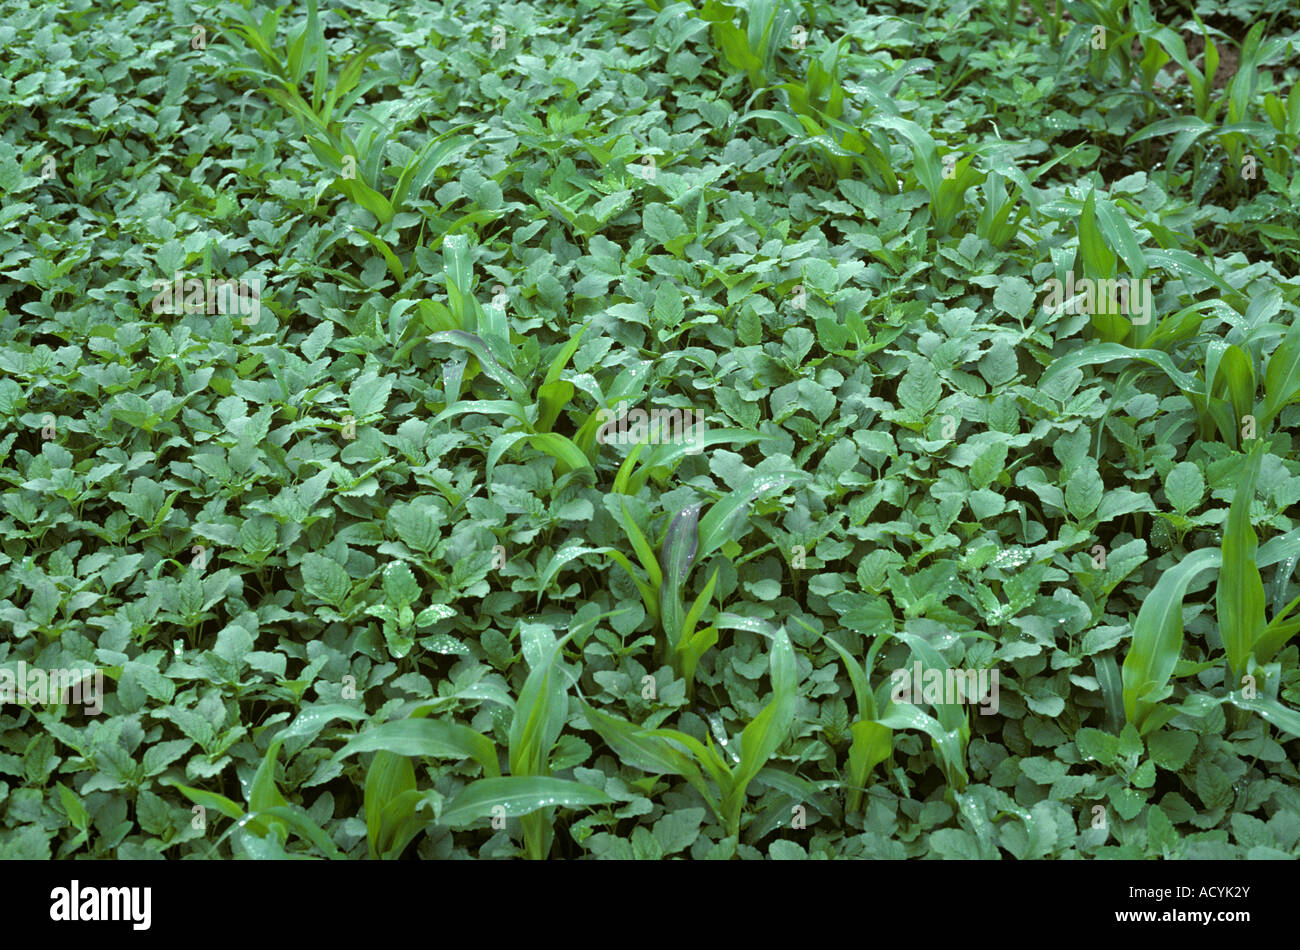 Amaranth or pigweed Amaranthus sp and other weeds in a young maize or corn crop Alsace France Stock Photo